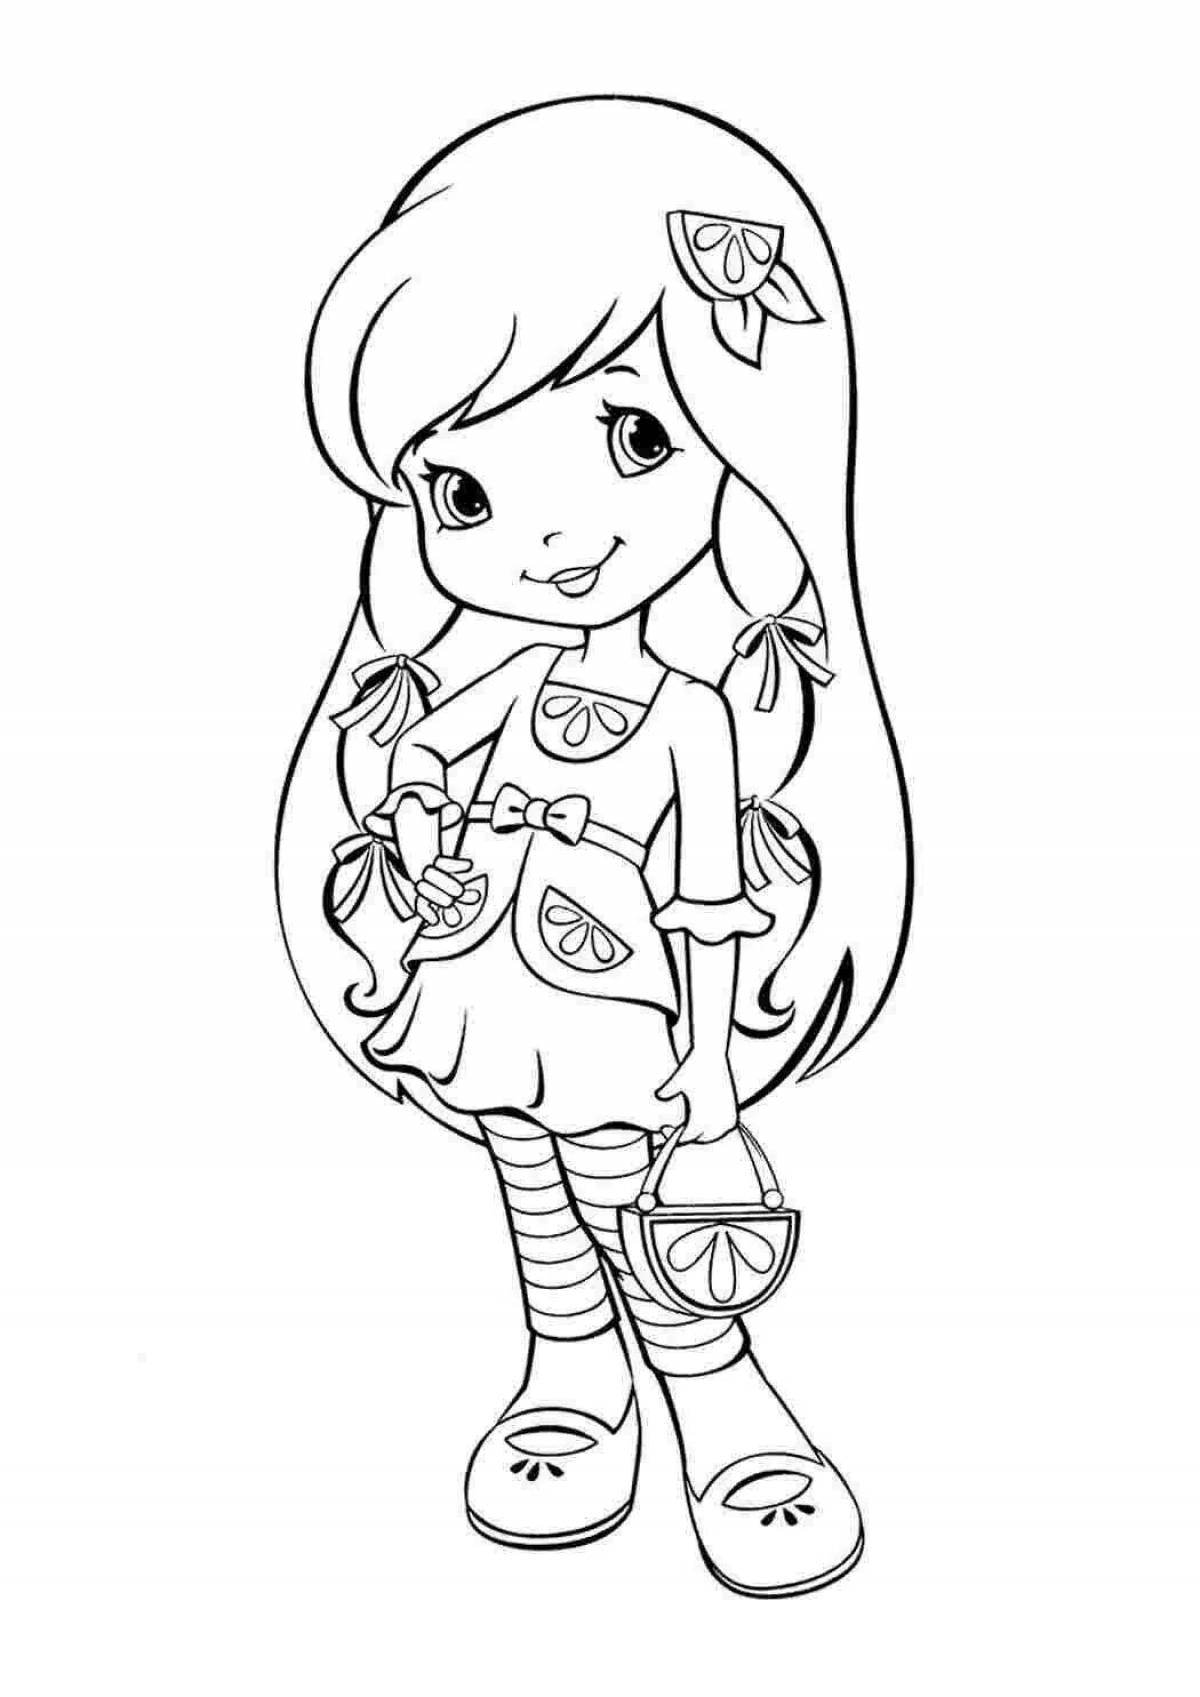 Glamor coloring page for girls